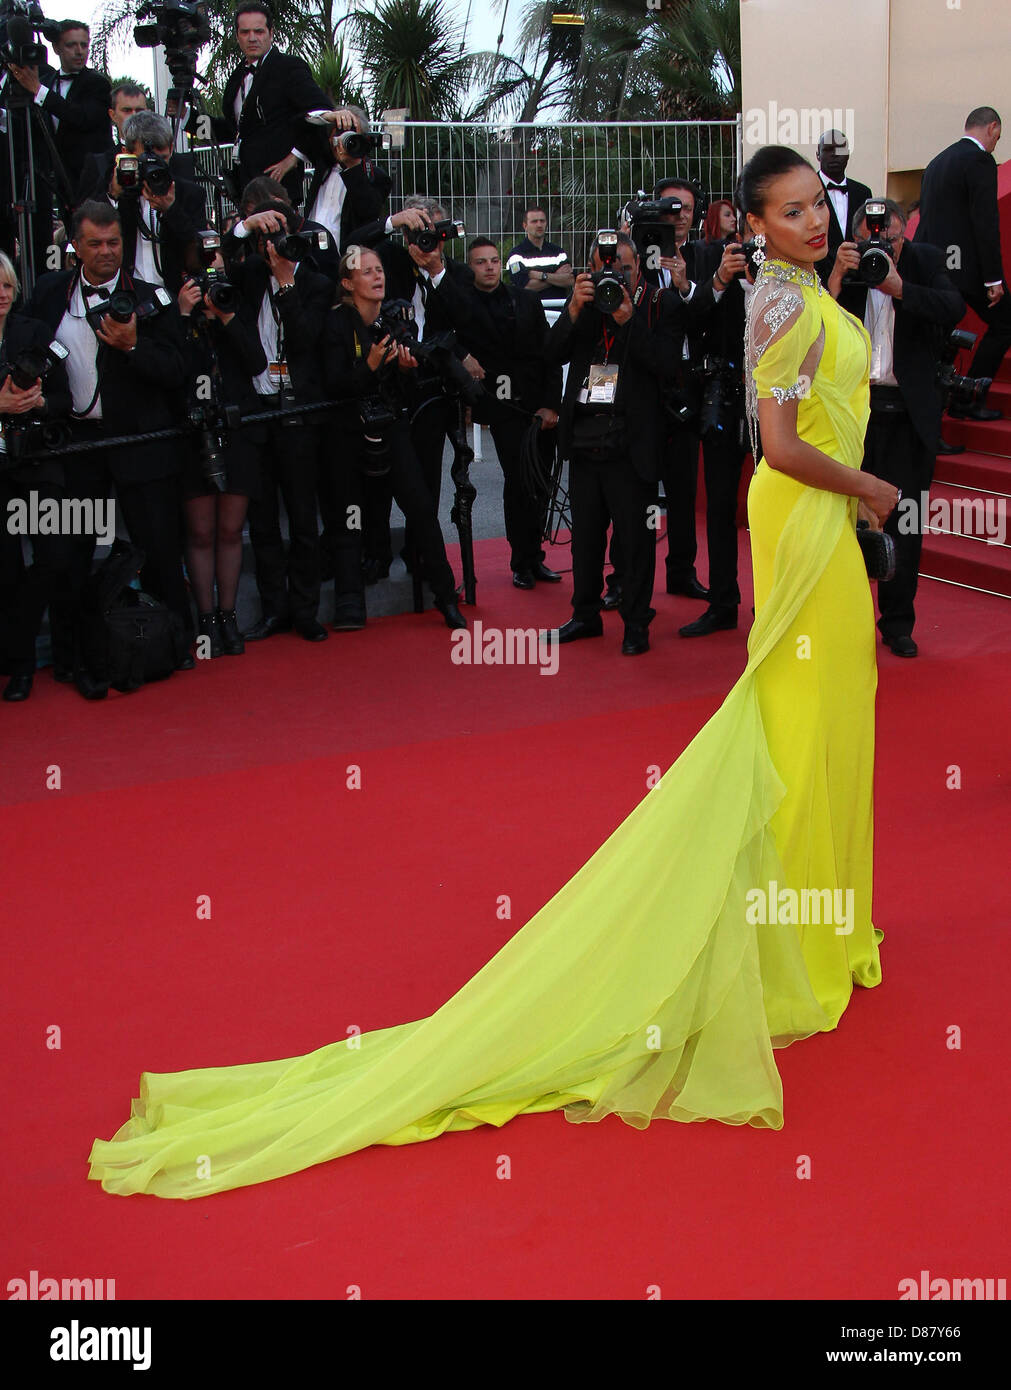 Cannes, France, 20th May 2013: Selita Ebanks attends the Blood Ties premiere during The 66th Annual Cannes Film Festival at the Palais des Festivals in Cannes, France. Credit: WFPA/Alamy Live News Stock Photo